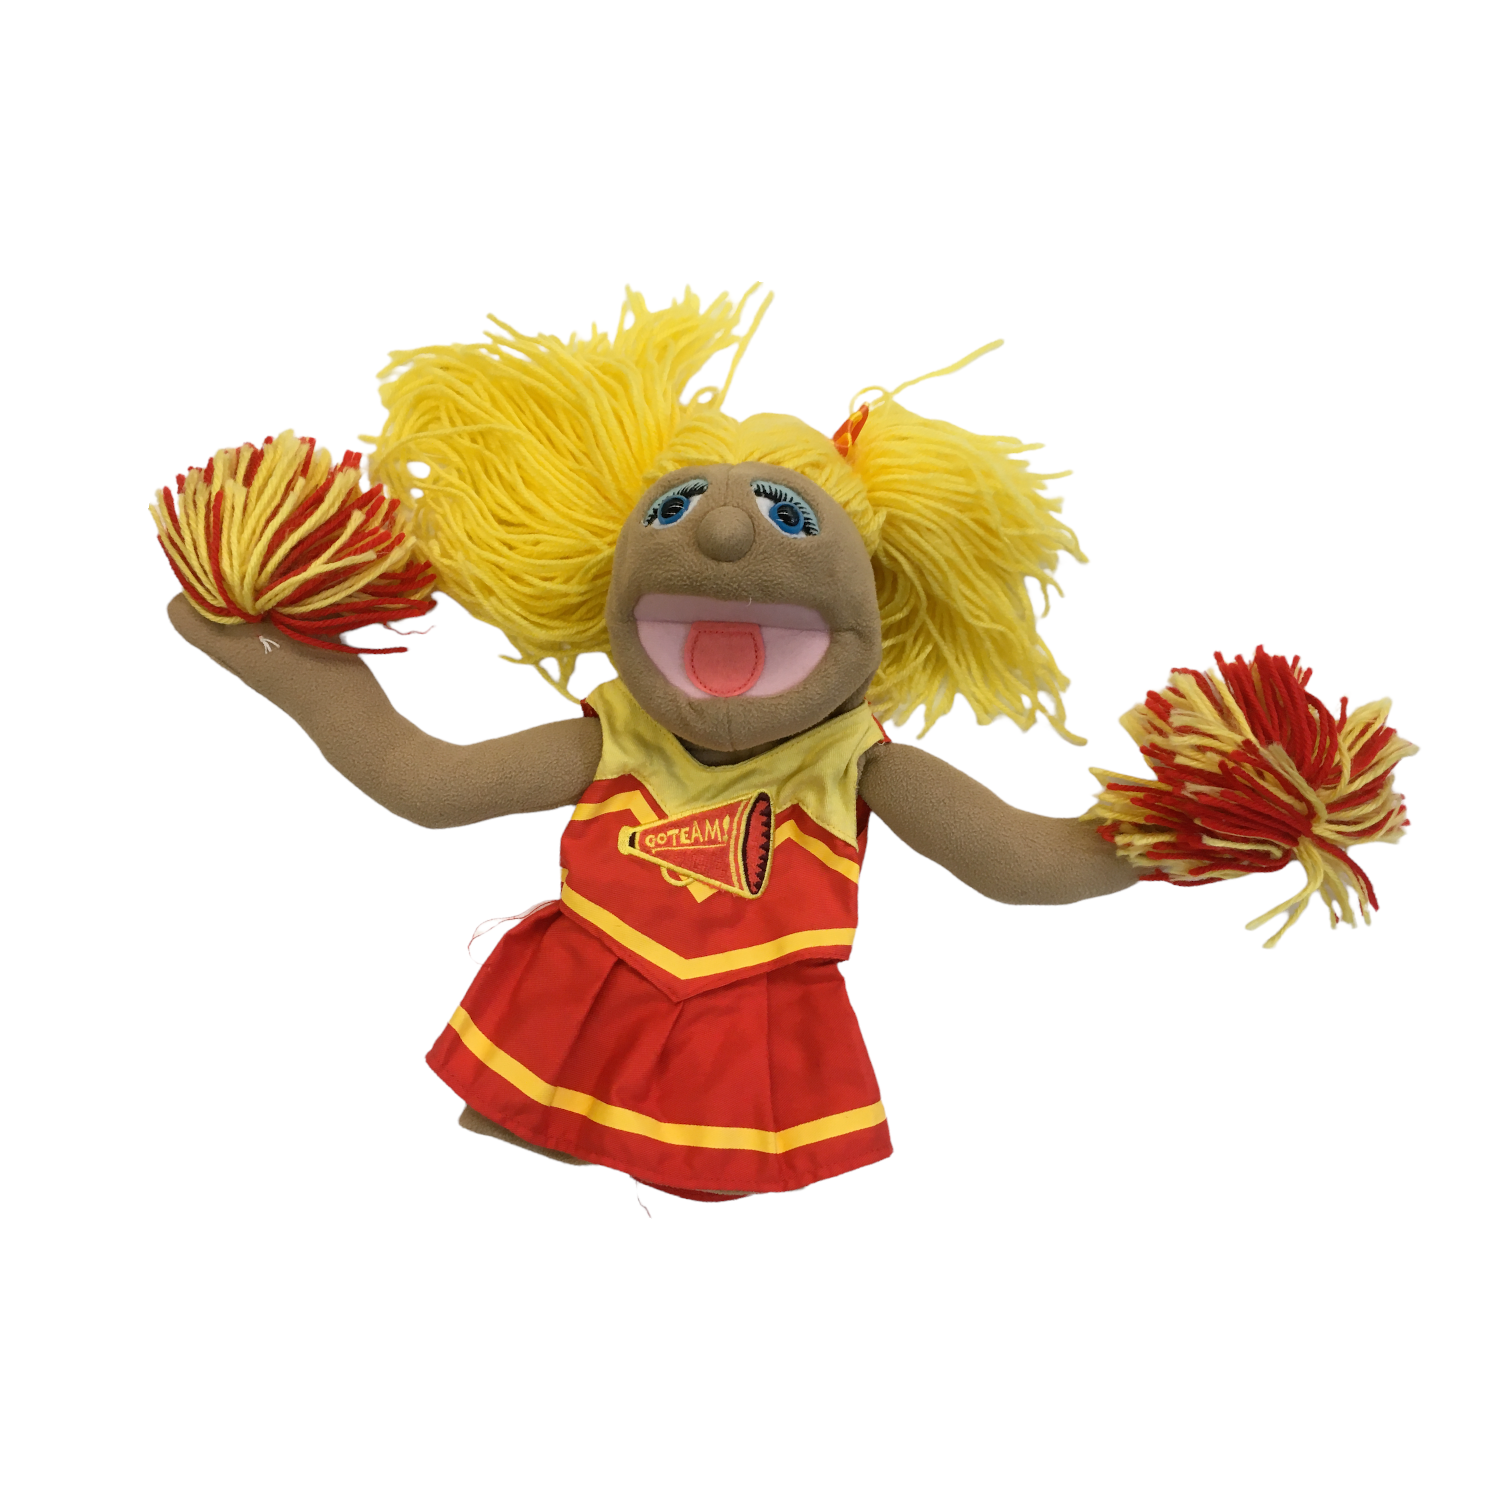 Puppet: Cheerleader, Toys

#resalerocks #pipsqueakresale #vancouverwa #portland #reusereducerecycle #fashiononabudget #chooseused #consignment #savemoney #shoplocal #weship #keepusopen #shoplocalonline #resale #resaleboutique #mommyandme #minime #fashion #reseller                                                                                                                                      Cross posted, items are located at #PipsqueakResaleBoutique, payments accepted: cash, paypal & credit cards. Any flaws will be described in the comments. More pictures available with link above. Local pick up available at the #VancouverMall, tax will be added (not included in price), shipping available (not included in price, *Clothing, shoes, books & DVDs for $6.99; please contact regarding shipment of toys or other larger items), item can be placed on hold with communication, message with any questions. Join Pipsqueak Resale - Online to see all the new items! Follow us on IG @pipsqueakresale & Thanks for looking! Due to the nature of consignment, any known flaws will be described; ALL SHIPPED SALES ARE FINAL. All items are currently located inside Pipsqueak Resale Boutique as a store front items purchased on location before items are prepared for shipment will be refunded.